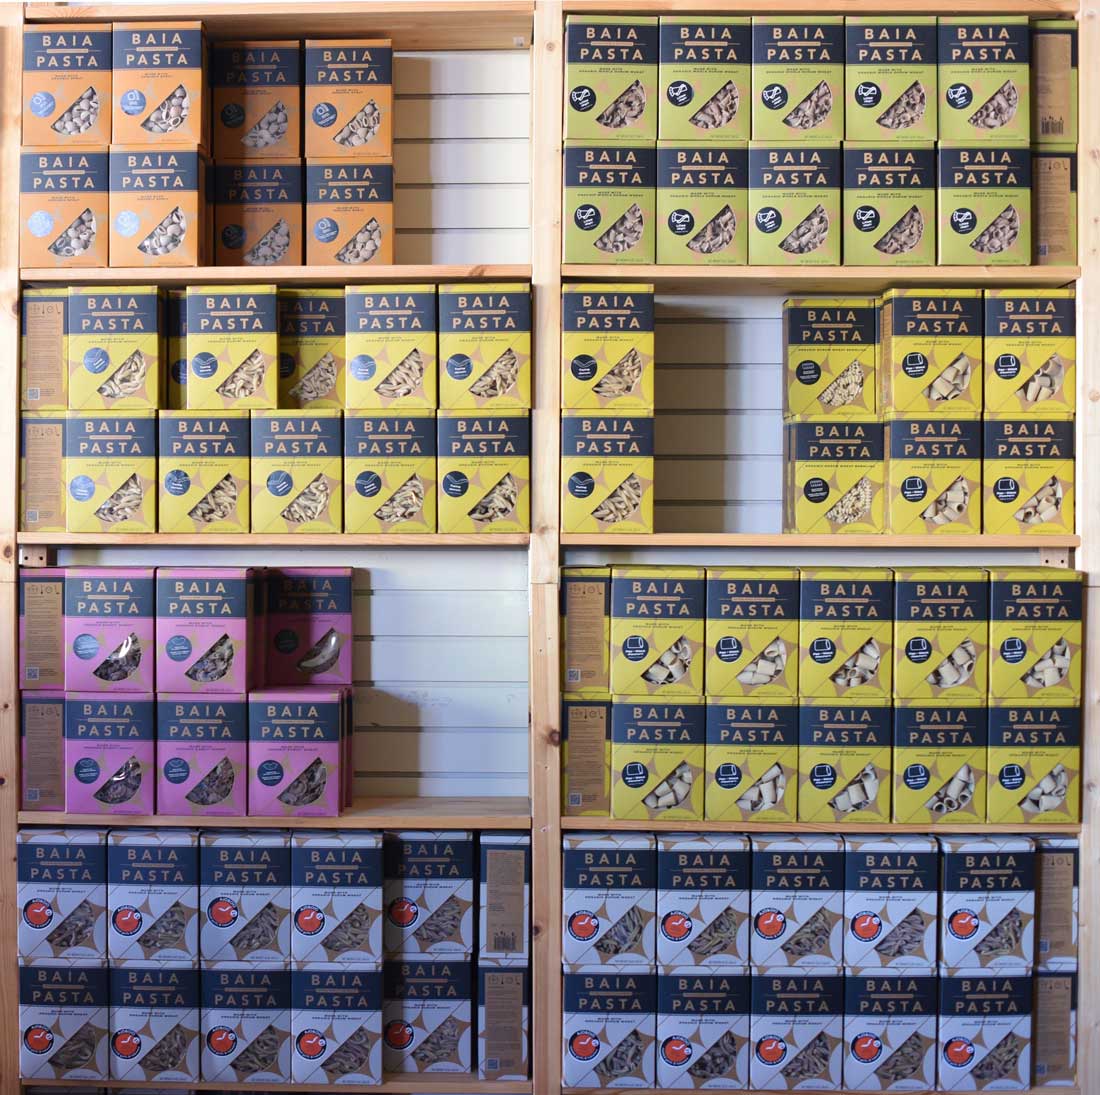 The bright Baia Pasta packaging stands out on the shelf.